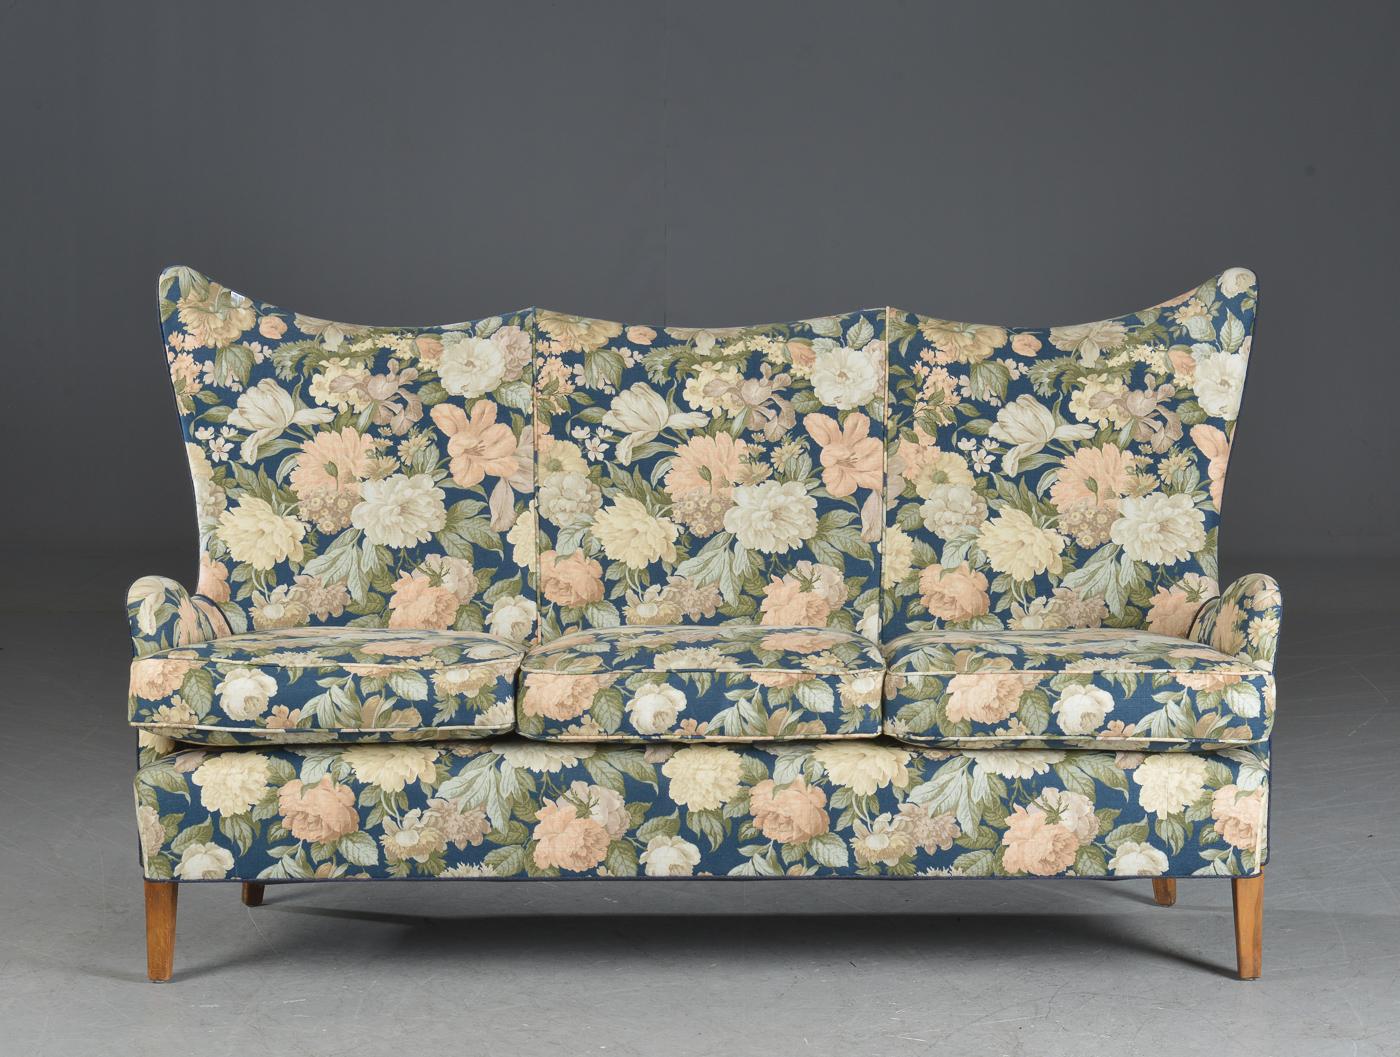 Very charming high back or wingback 1950s sofa from Denmark upholstered in a floral fabric. Sturdy construction raised on beech wood legs. Nice rolled armrests reminiscent of Carl Malmsten's designs. High back sofas have a strong presence about them